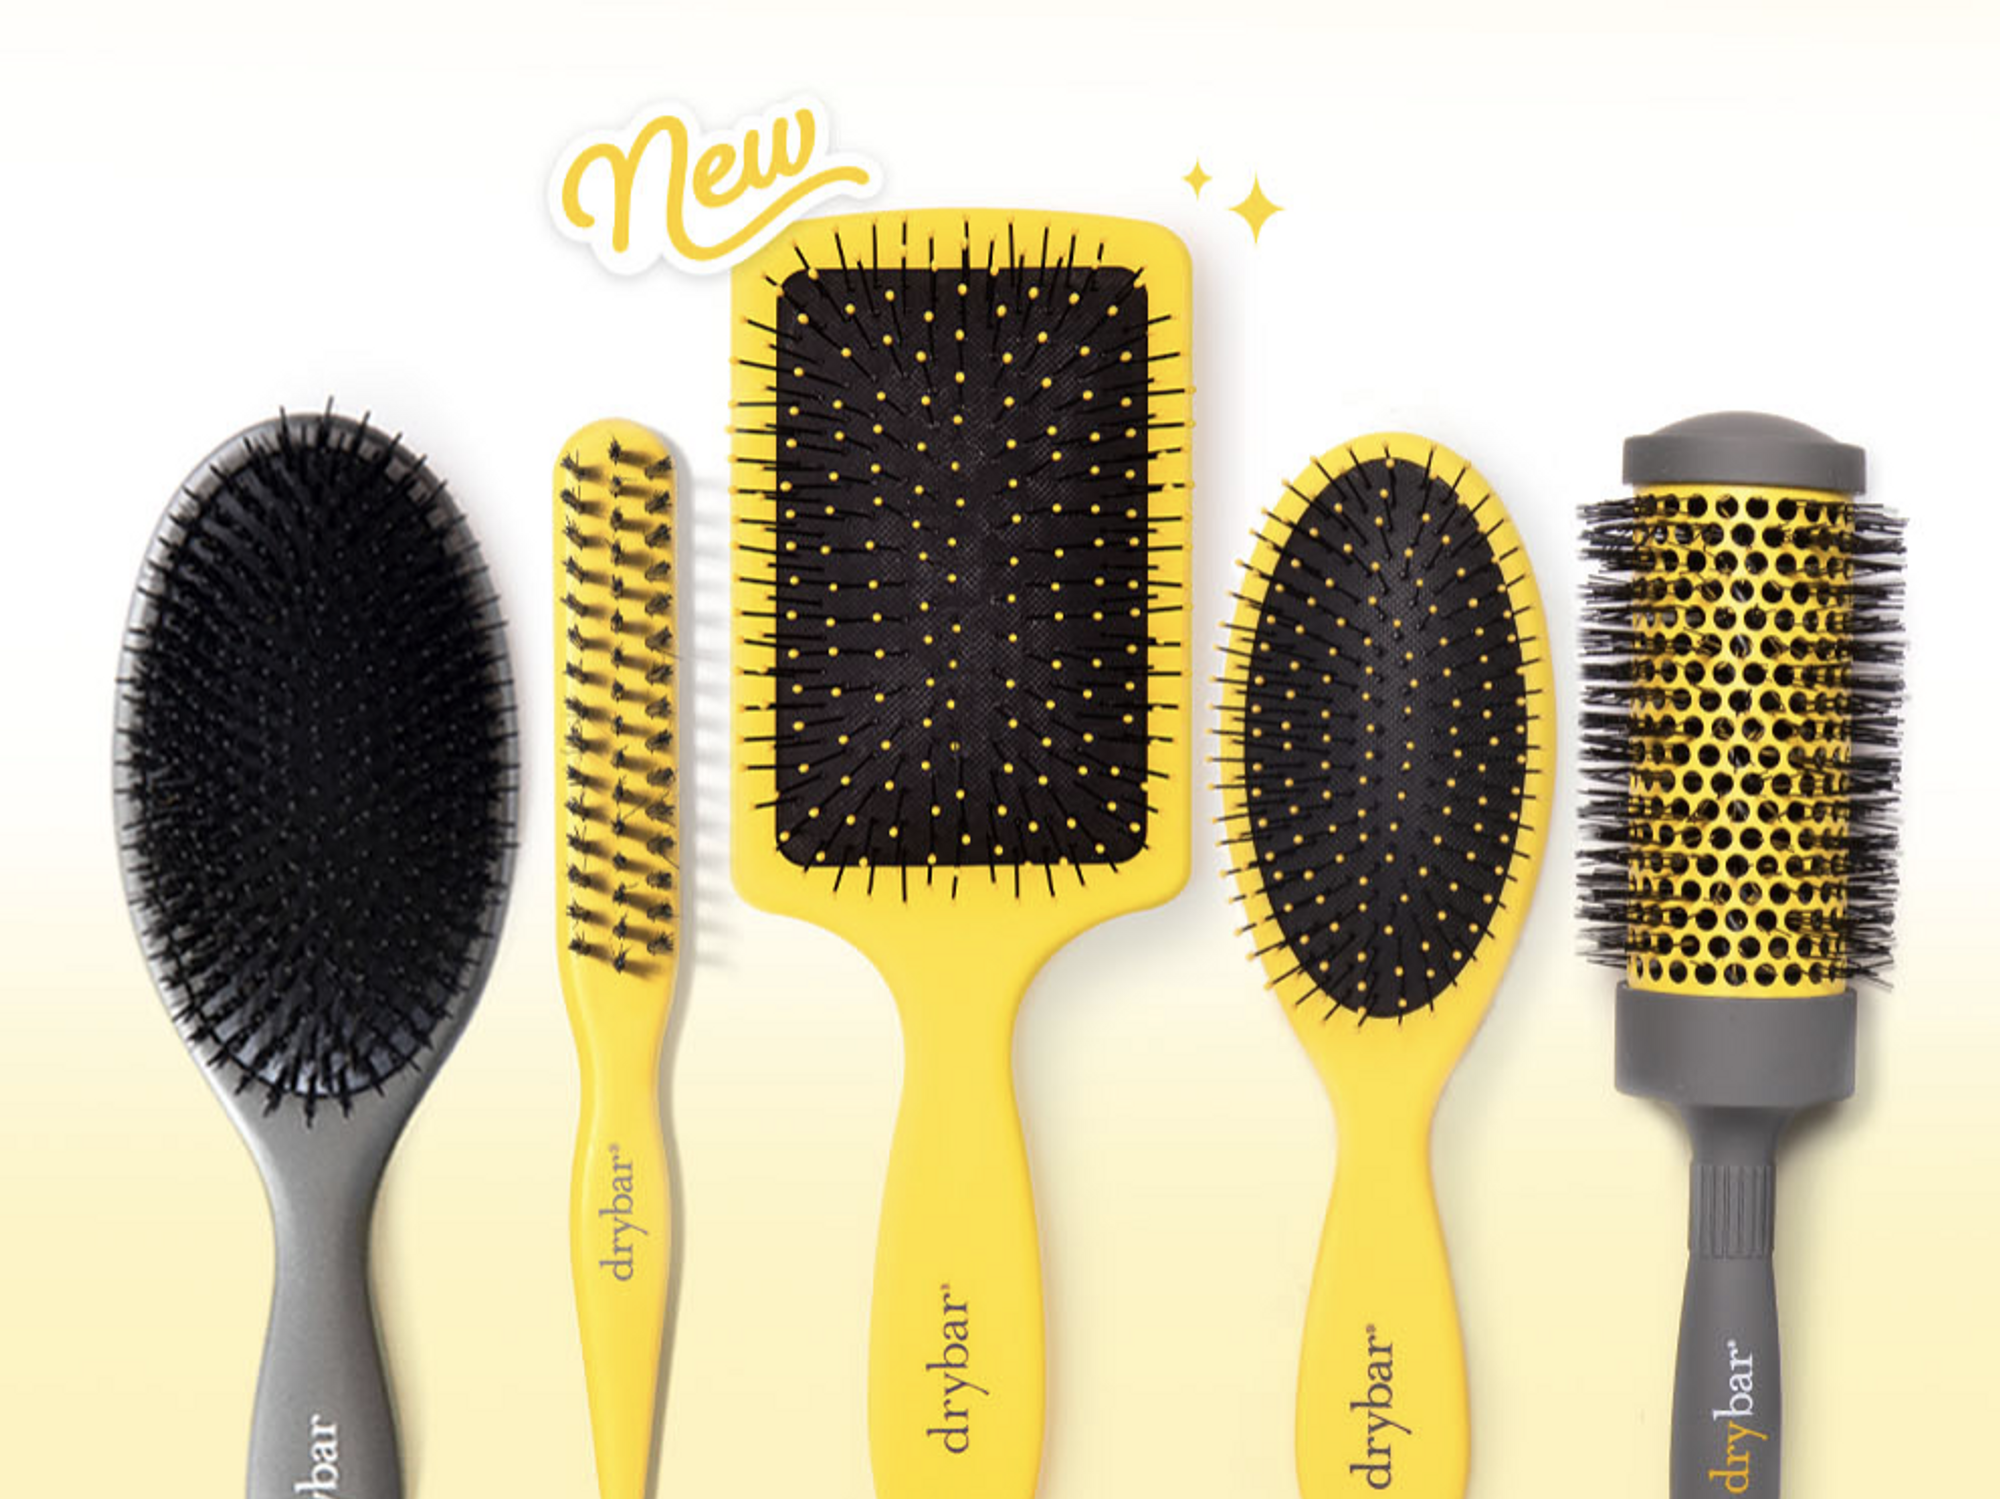 Drybar of Blowout Fame is Bought for $255 Million